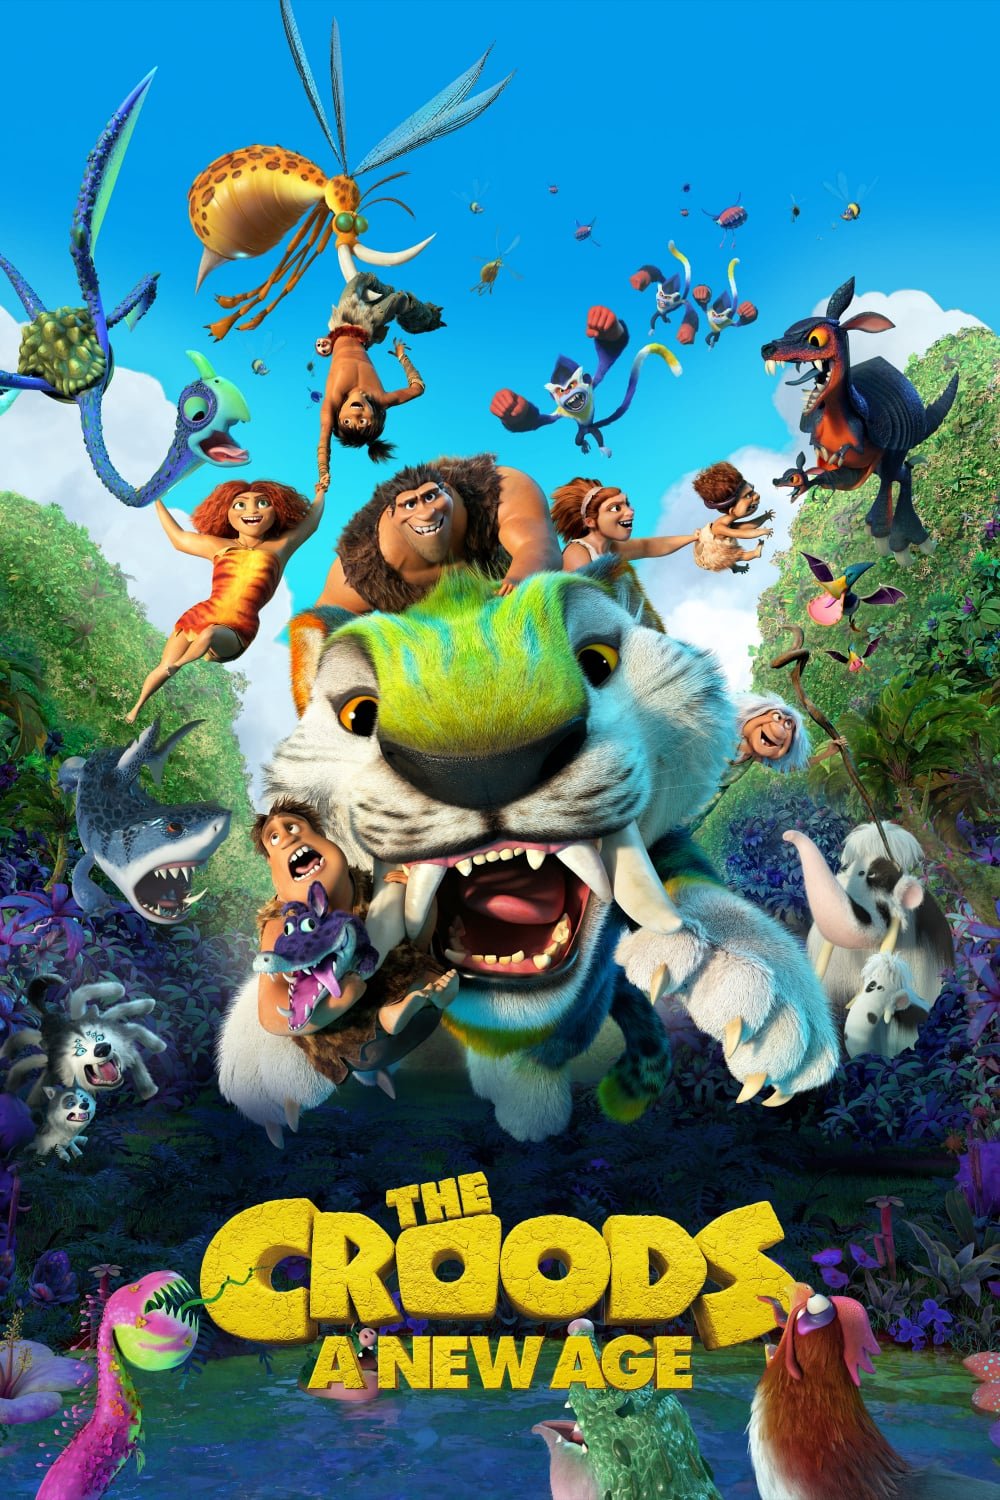 Movie poster from The Croods A New Age